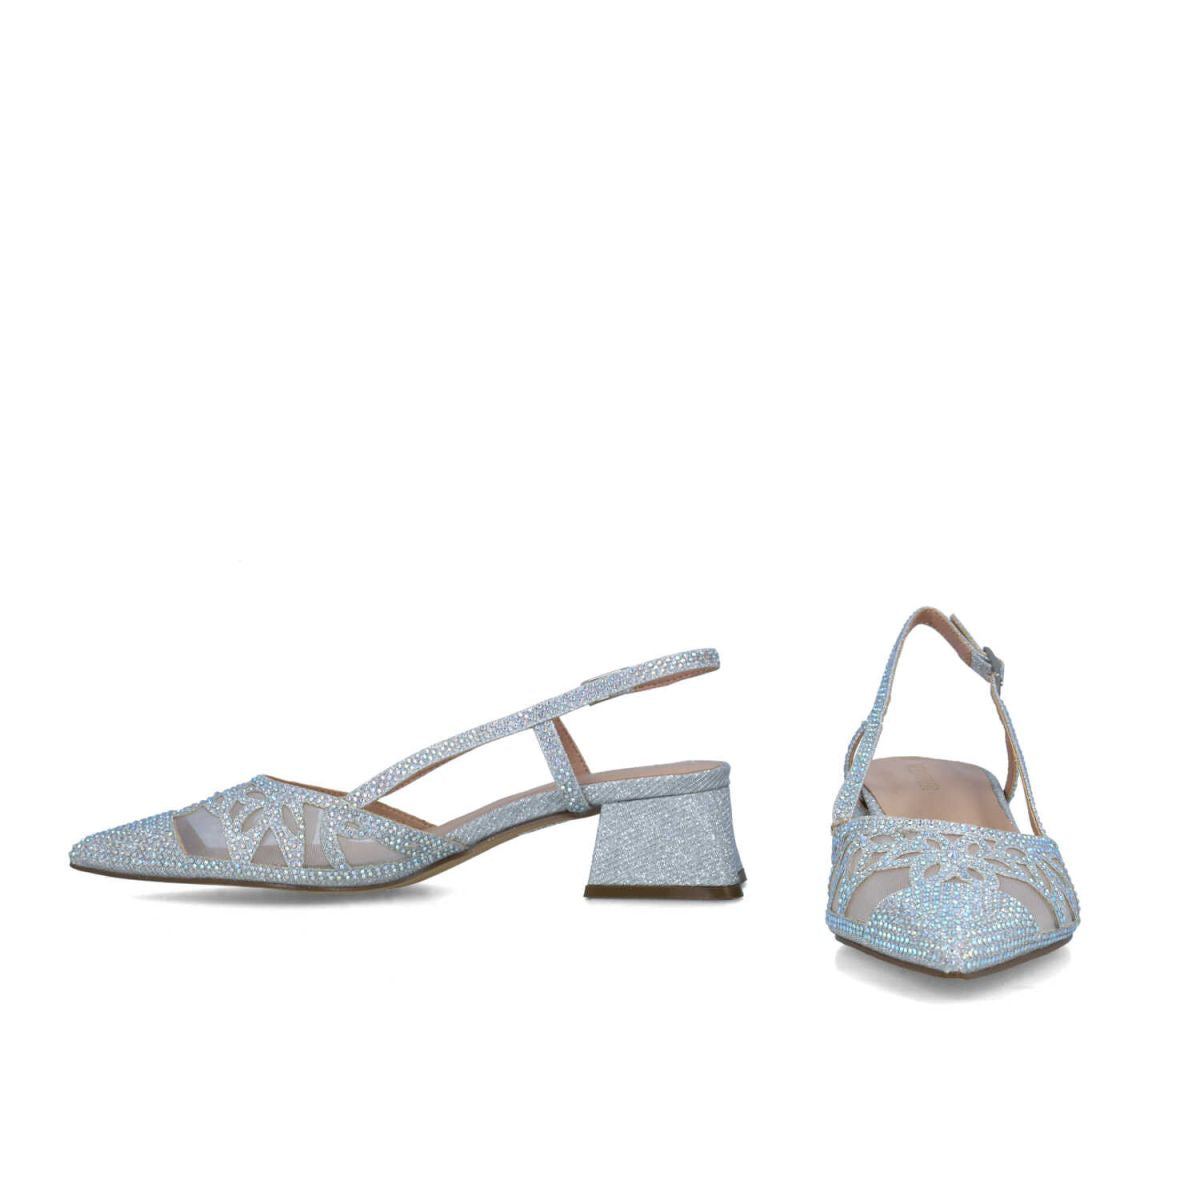 Direct front view of the pair of Stylish Silver Low Block Heel Sandals.